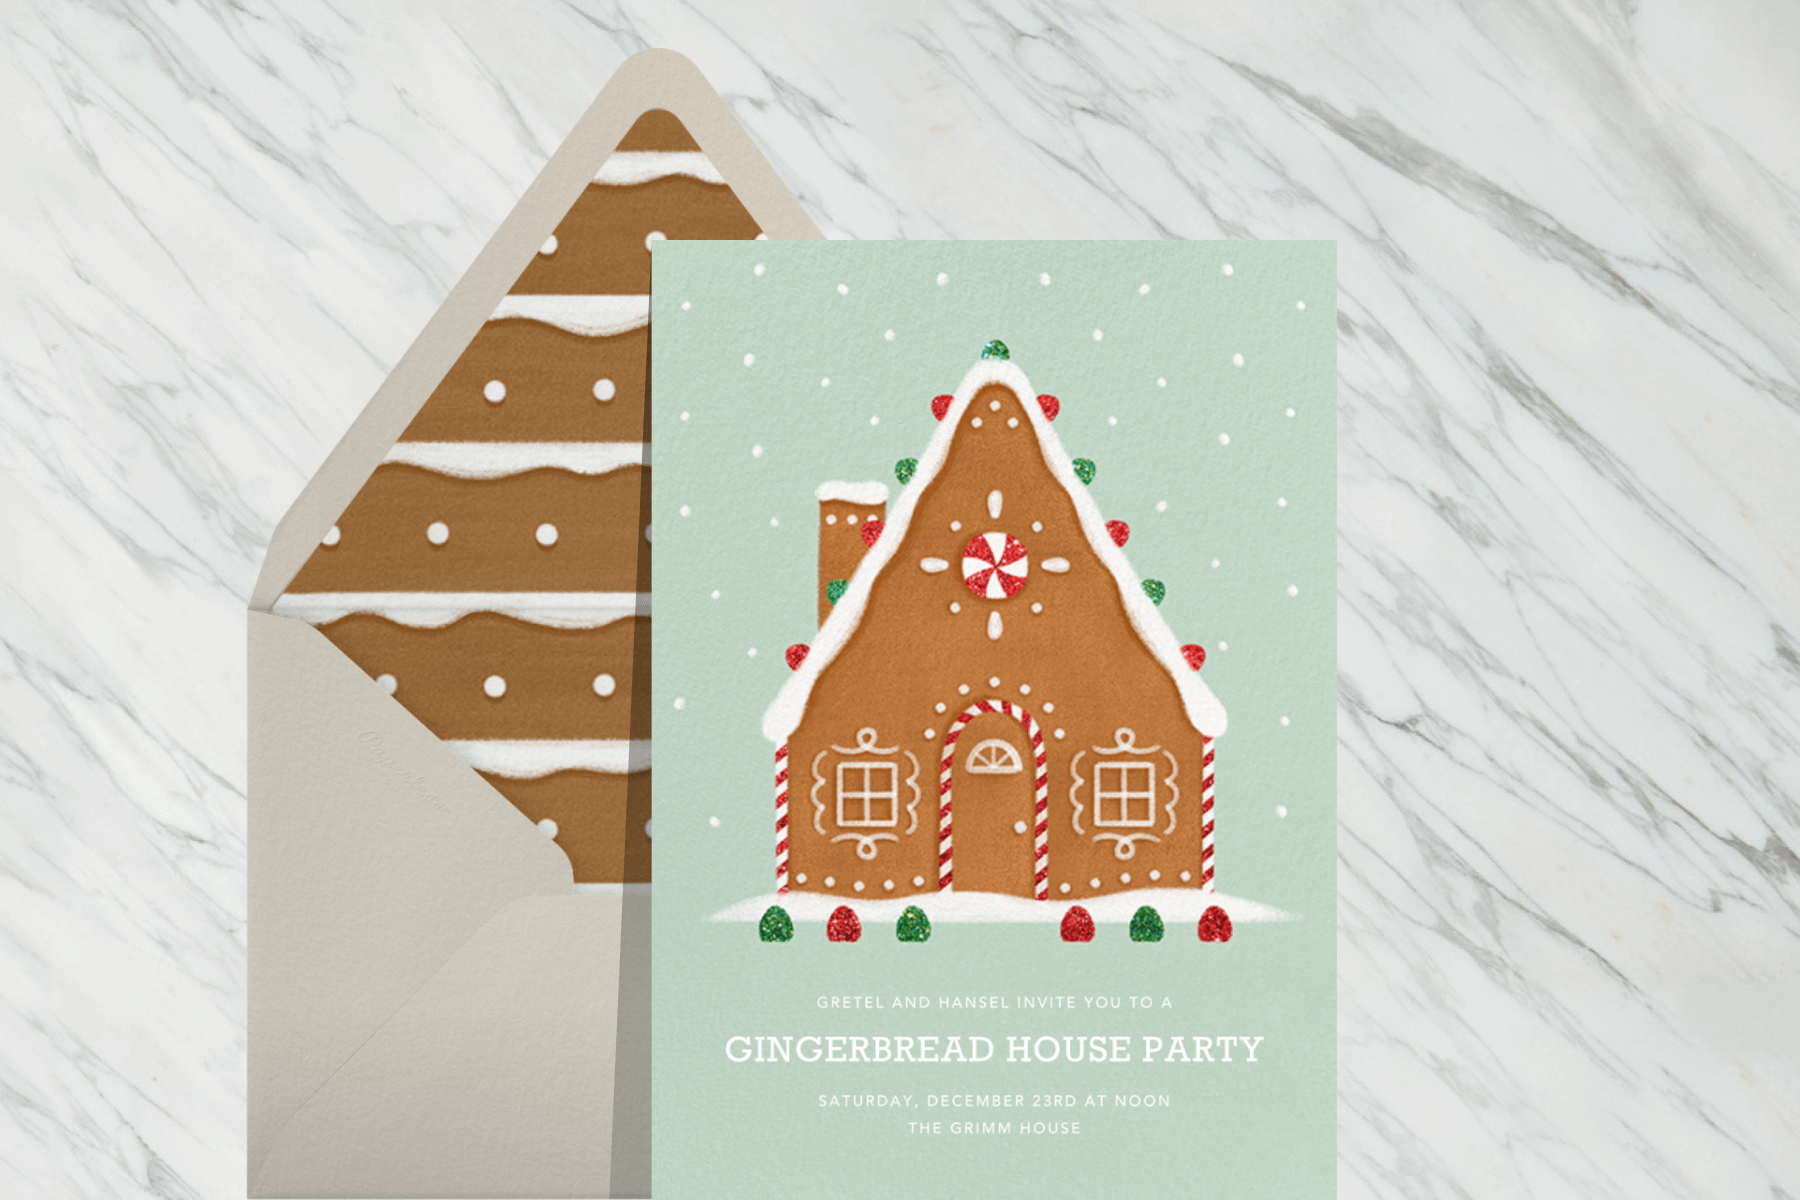 A mint gingerbread house party invitation featuring an illustration of a gingerbread house with a peppermint window and door.